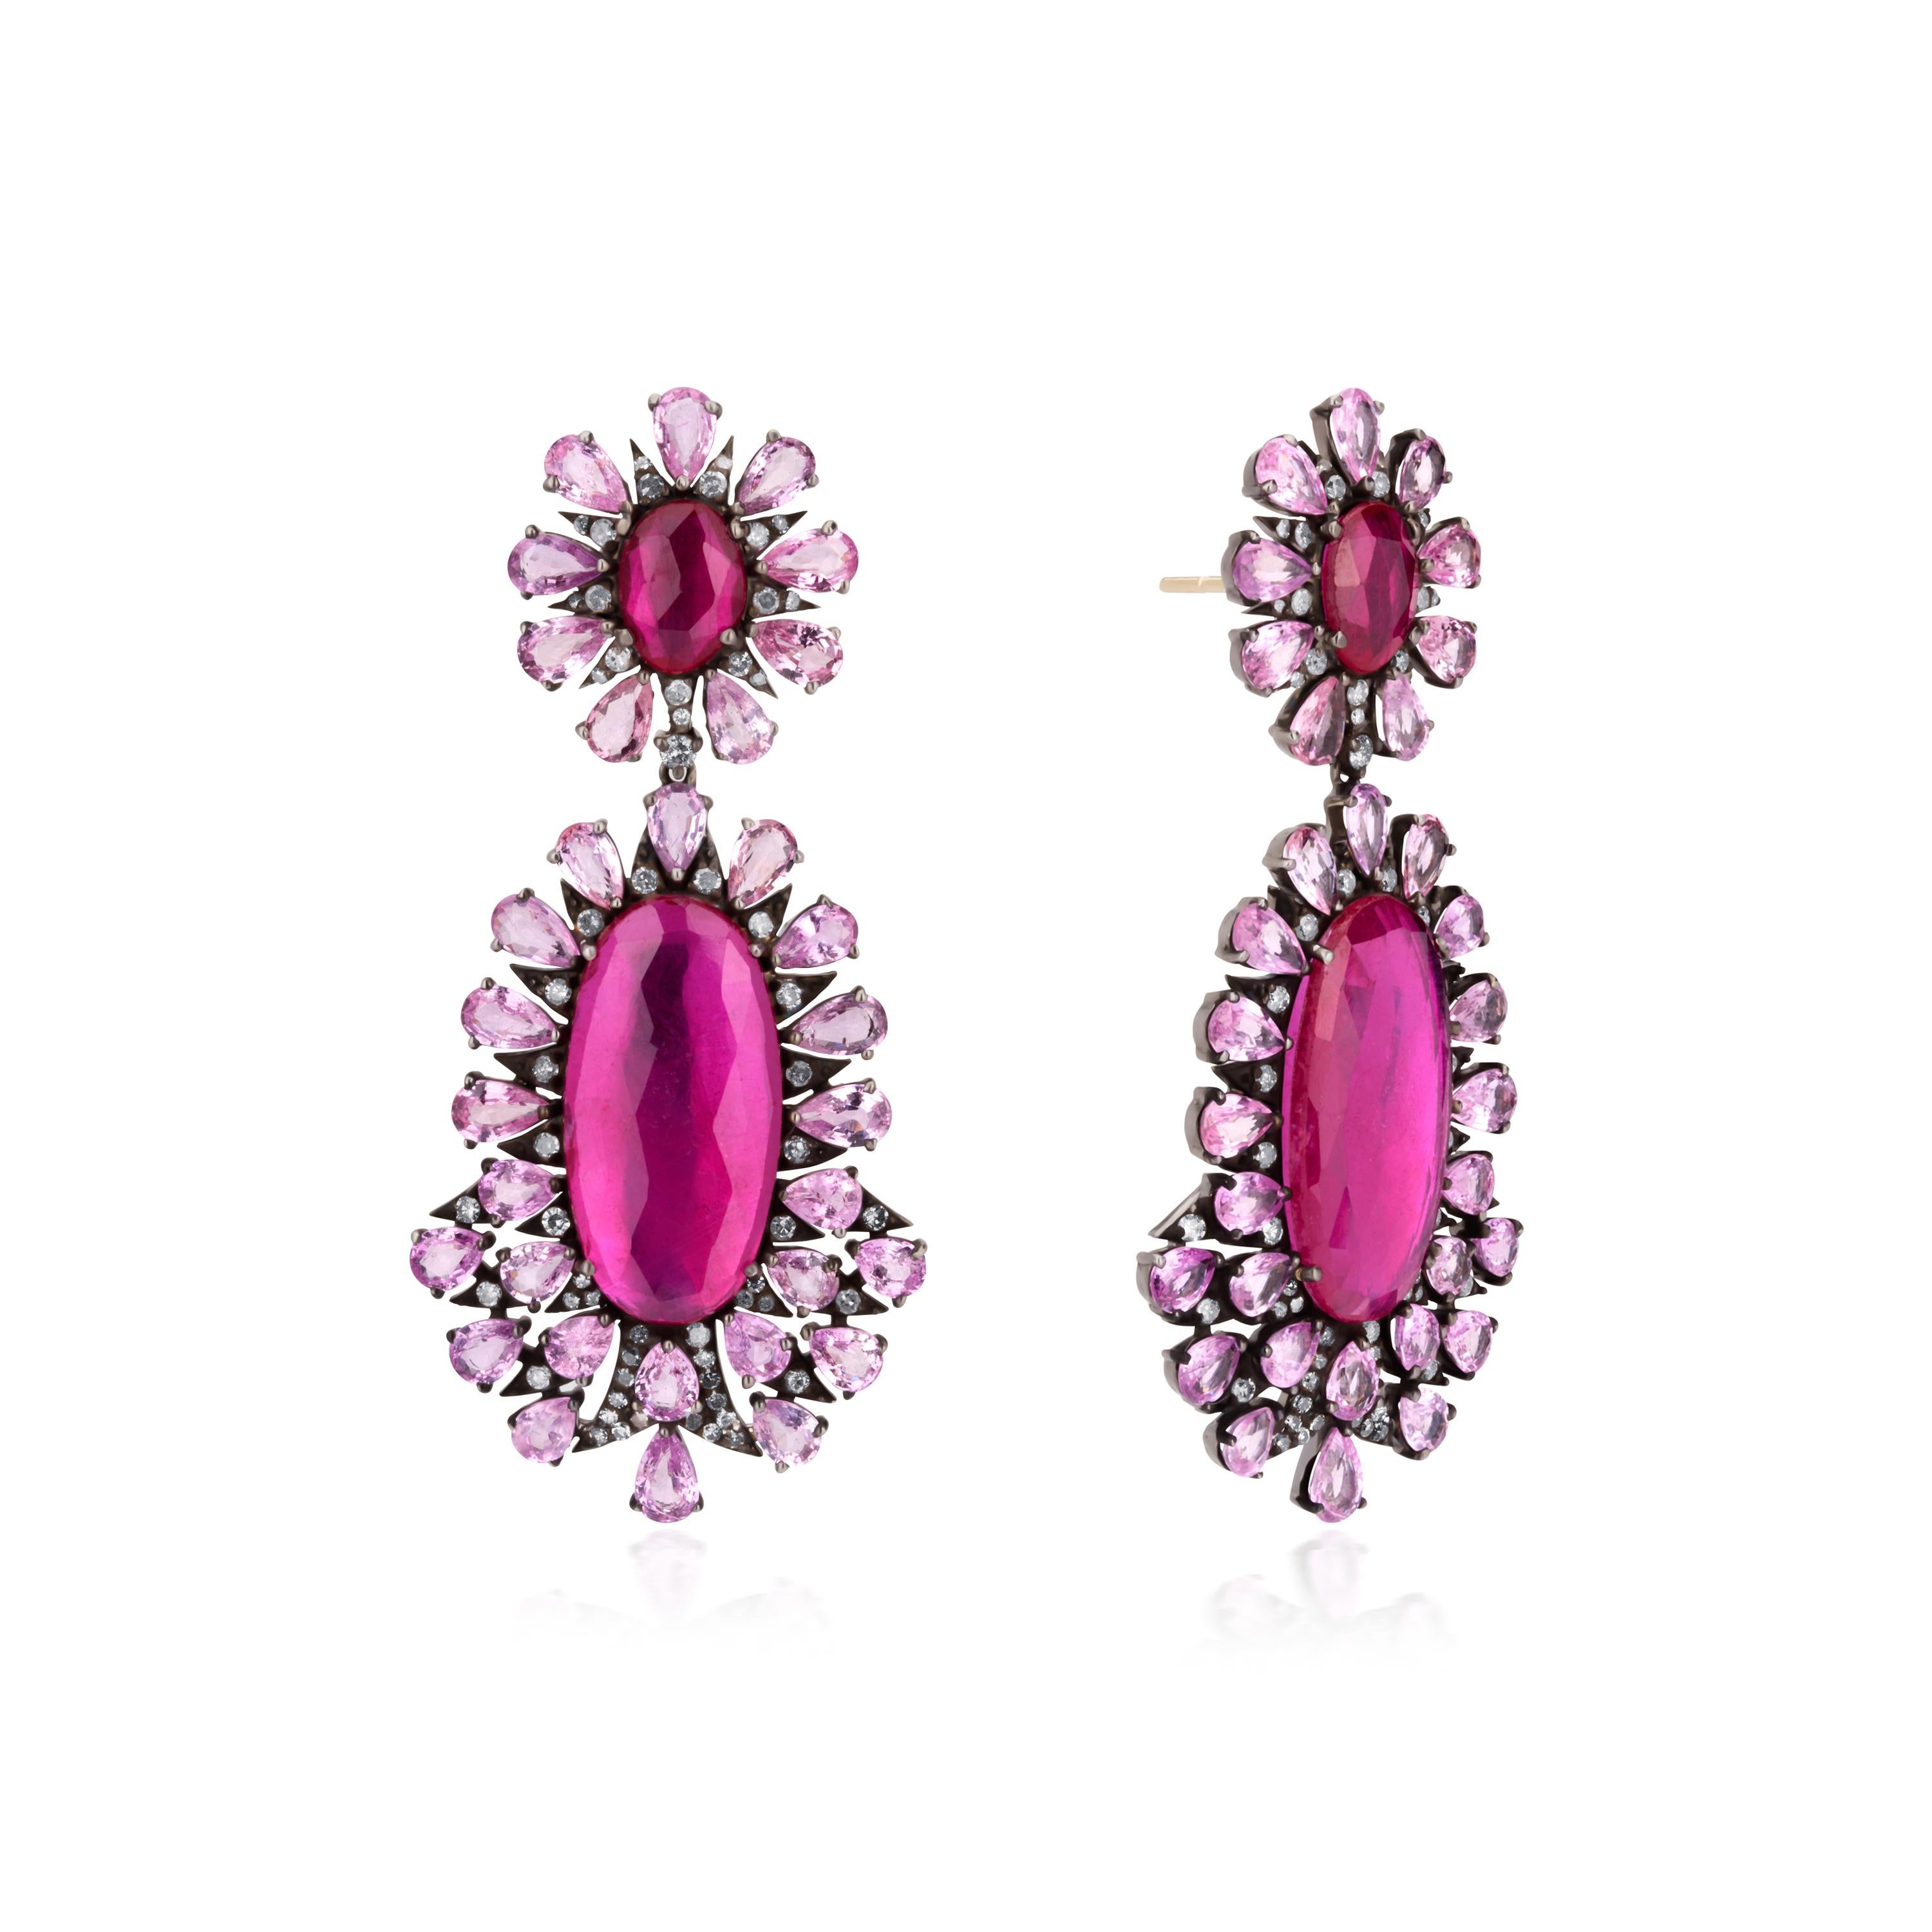 This beautifully matched pair of Victorian earrings showcase four raspberry red rubies together weighing 16.7Cts, glisten and glow within sparkling frames of faceted pink sapphires and diamonds at the top and the drop, all classically presented in